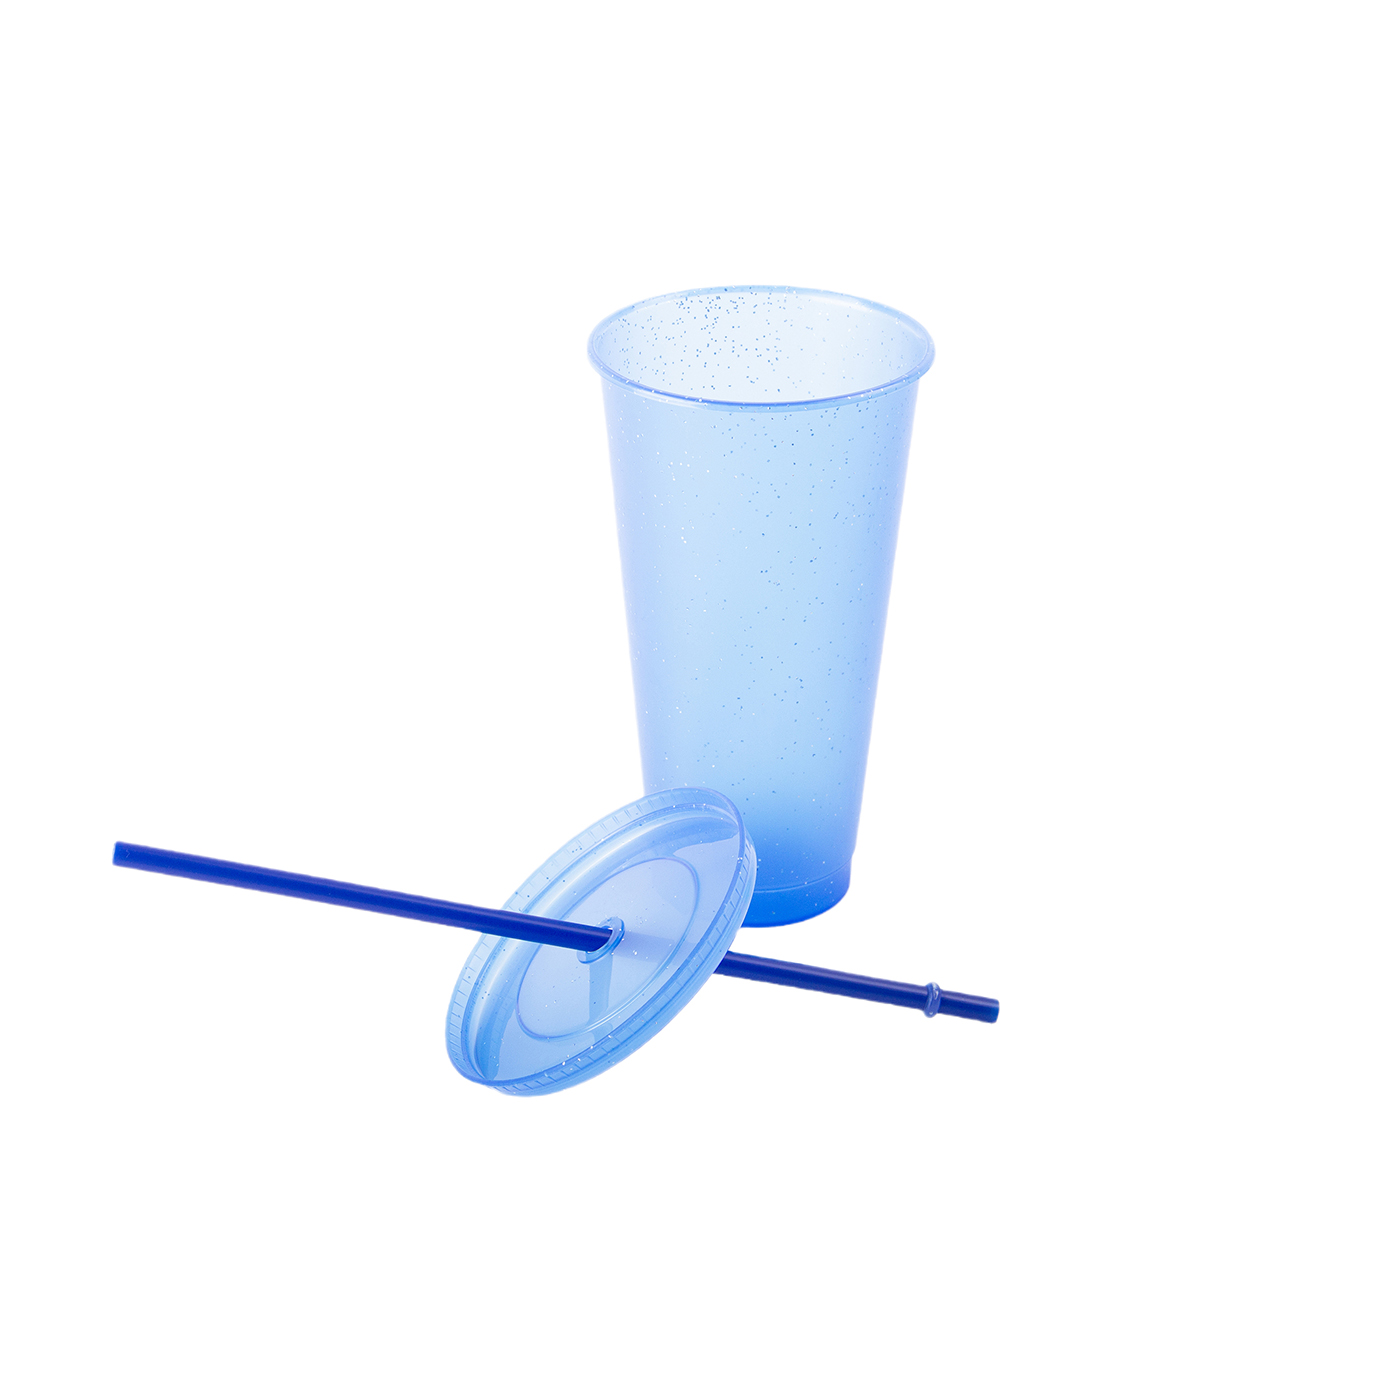 24 oz. Plastic Tumbler With Lid And Straw2